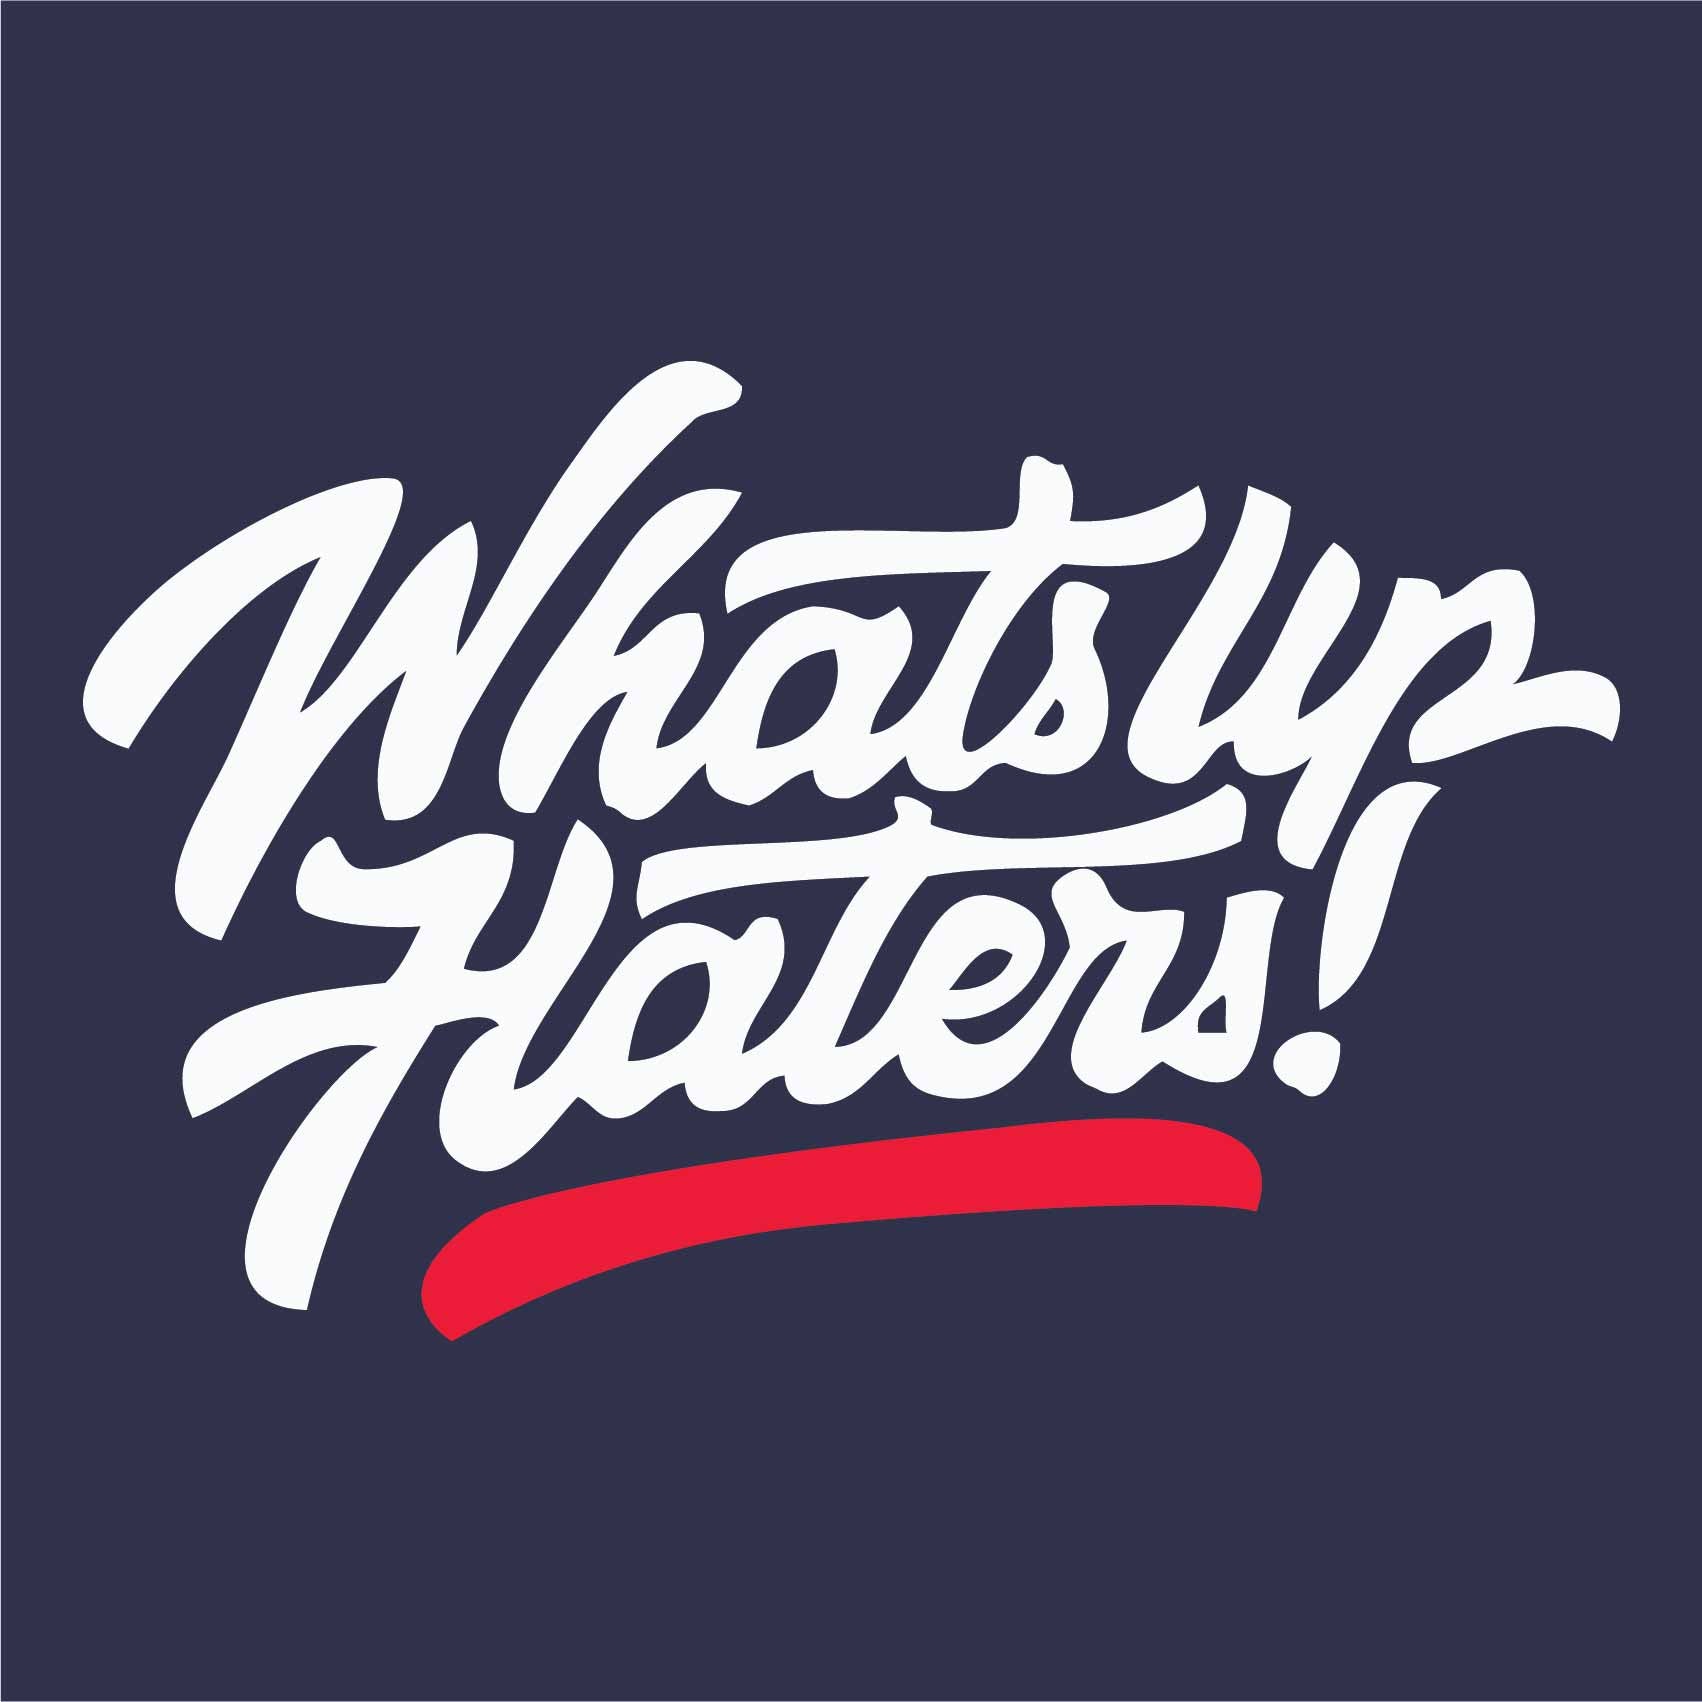 Whats Up Haters Reactr Tshirts For Men - Eyewearlabs